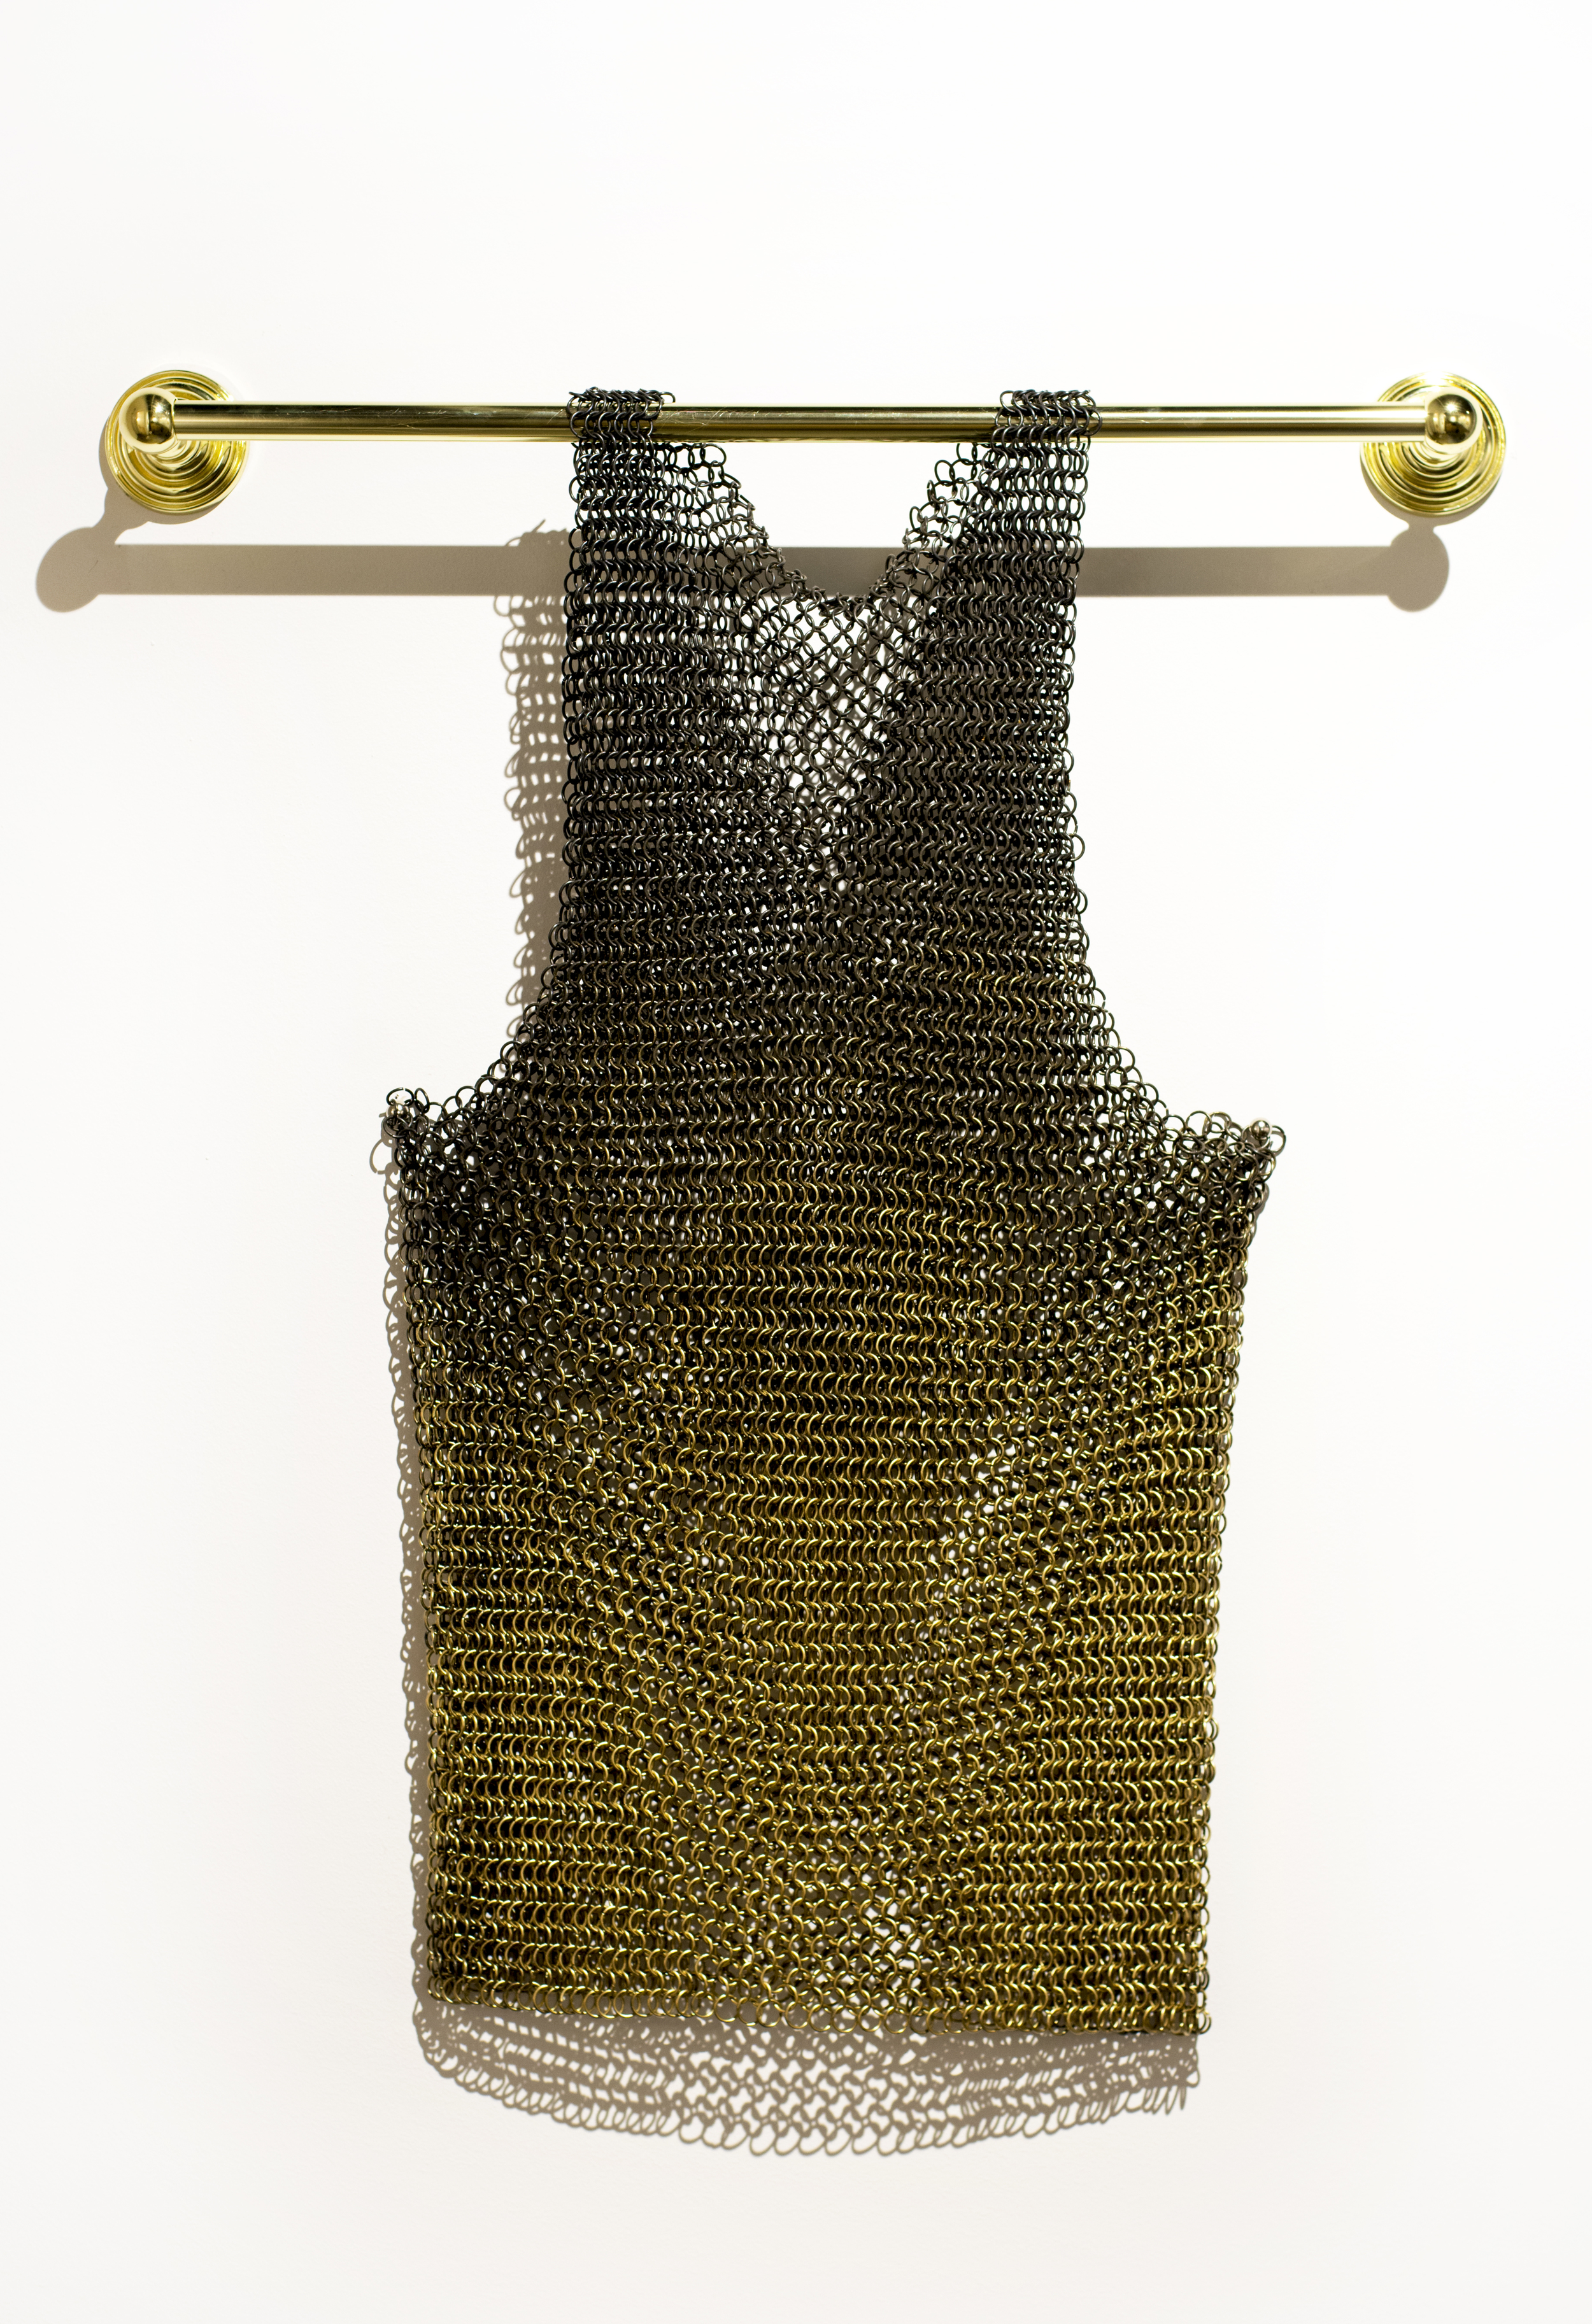  Victor Solomon, "We Talkin' Bout Armor." 2016. Chainmail jersey. 24 x 36 in. 